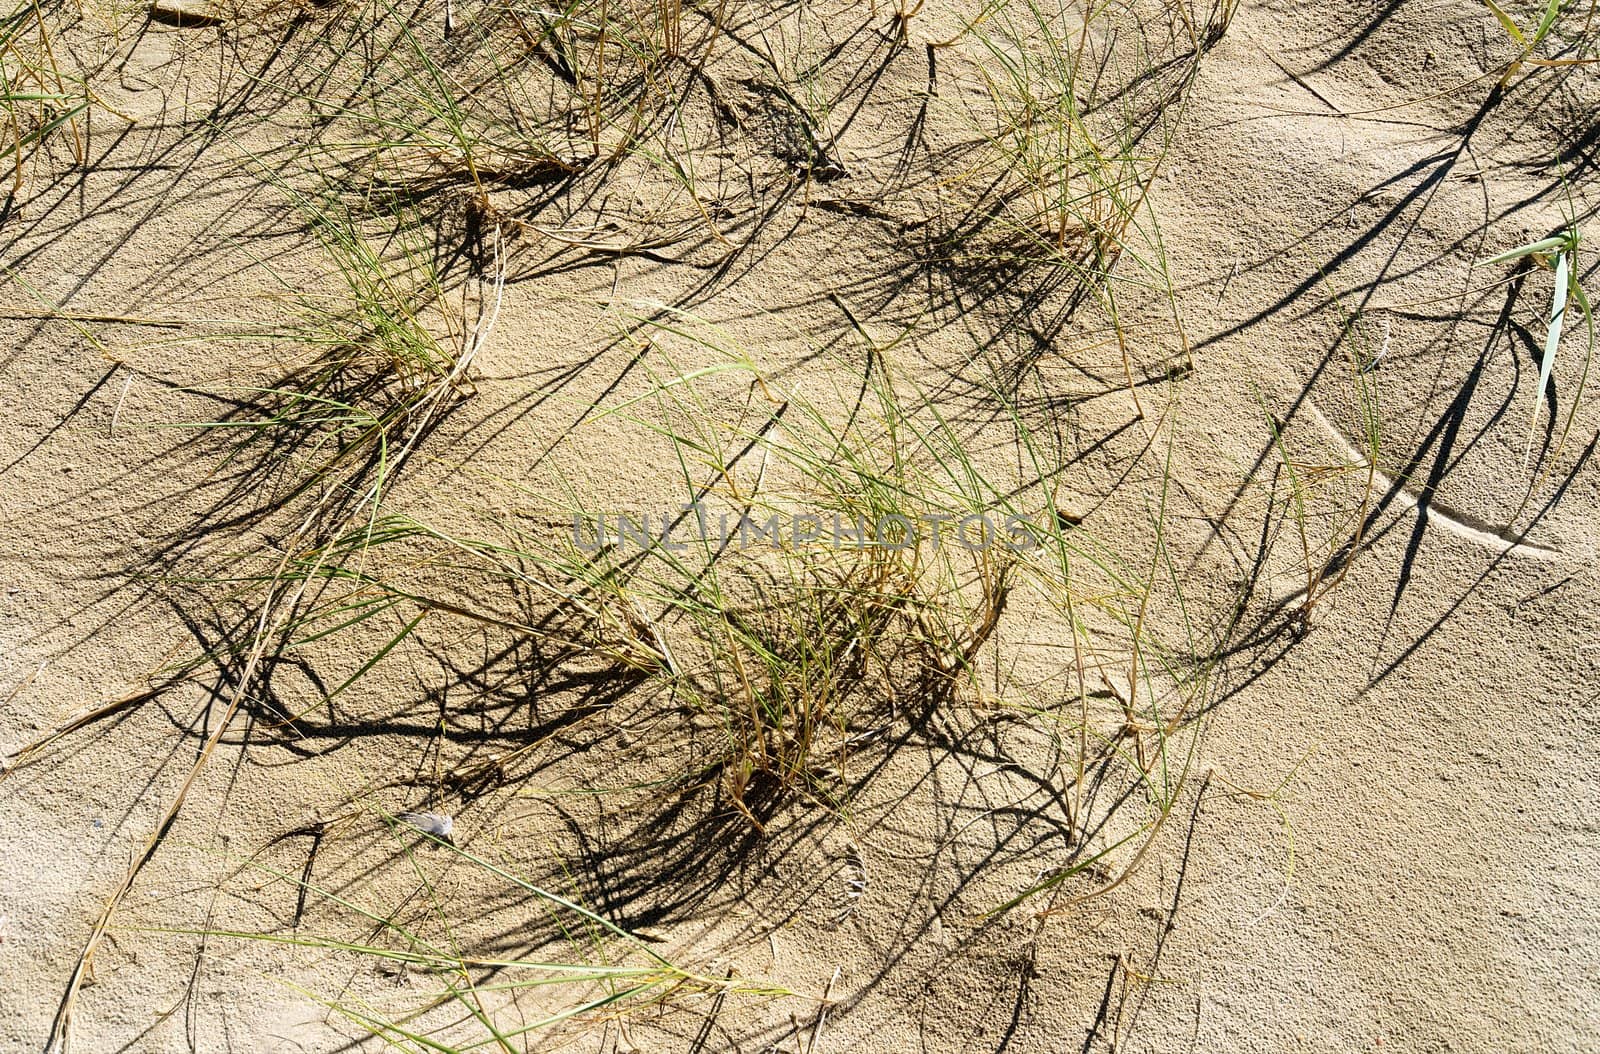 detail of dune with halms of grass and their shadows and some little white feathers